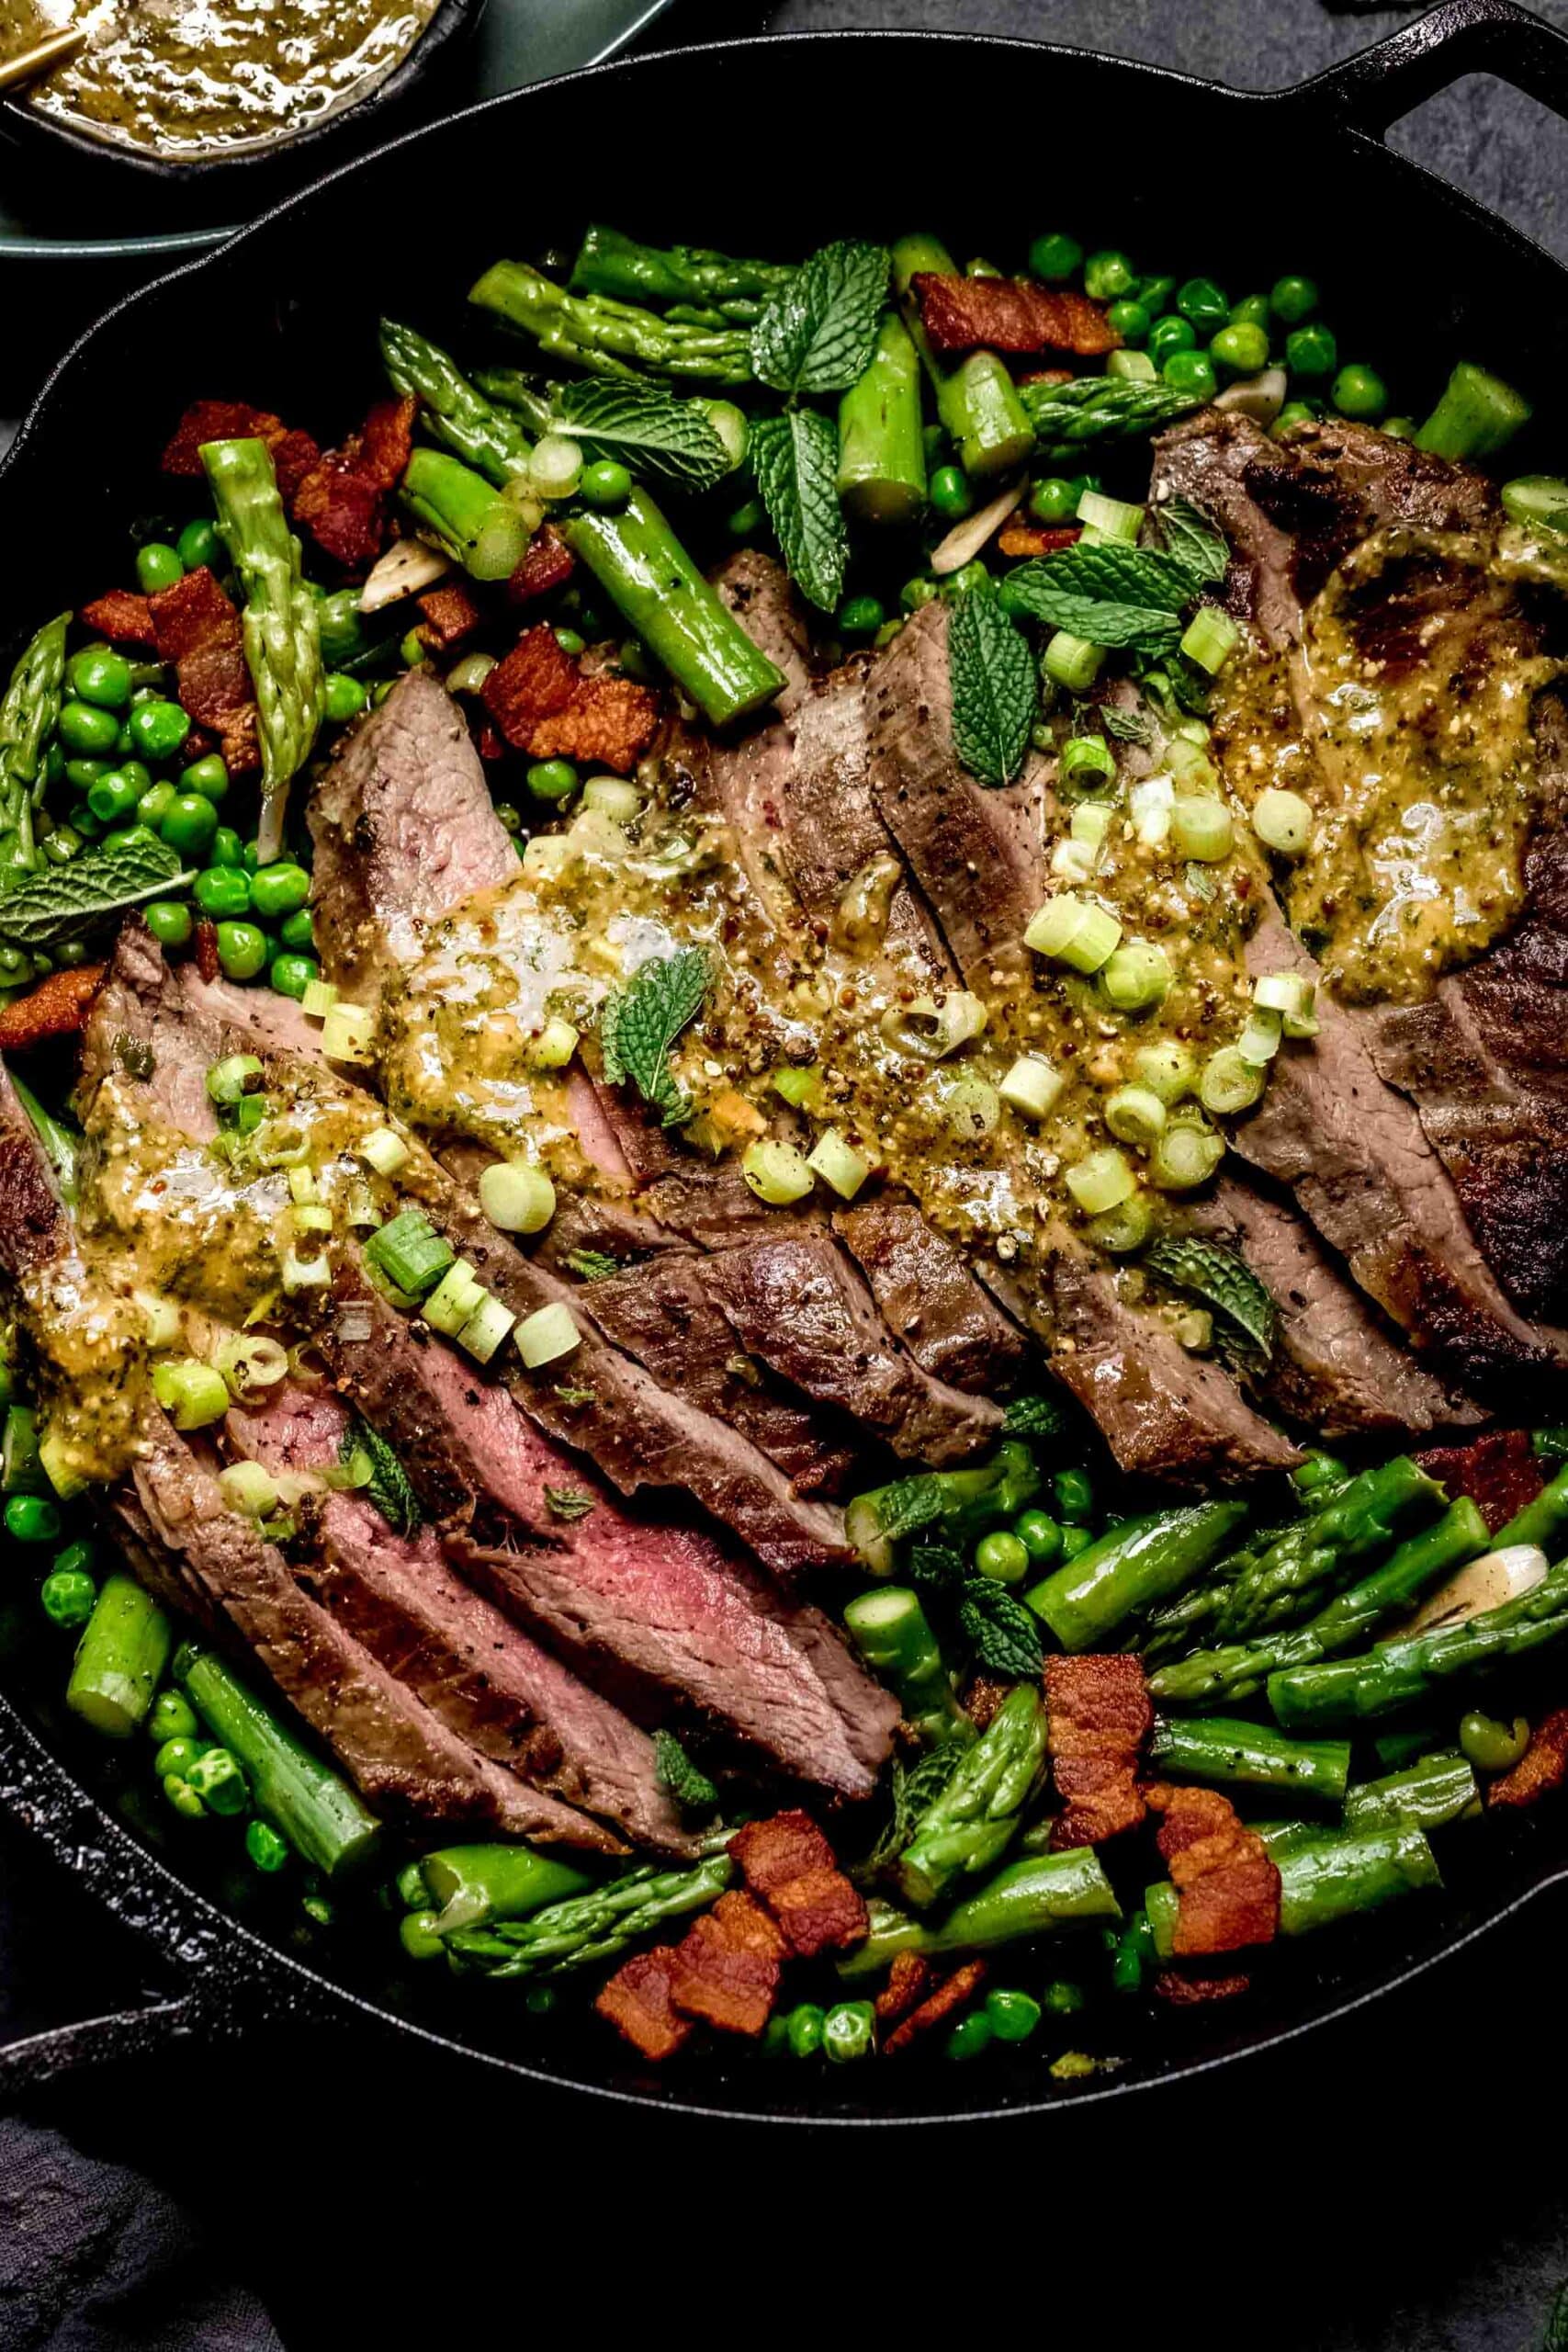 Sliced steak in skillet topped with mustard sauce and surrounded by asparagus and peas.